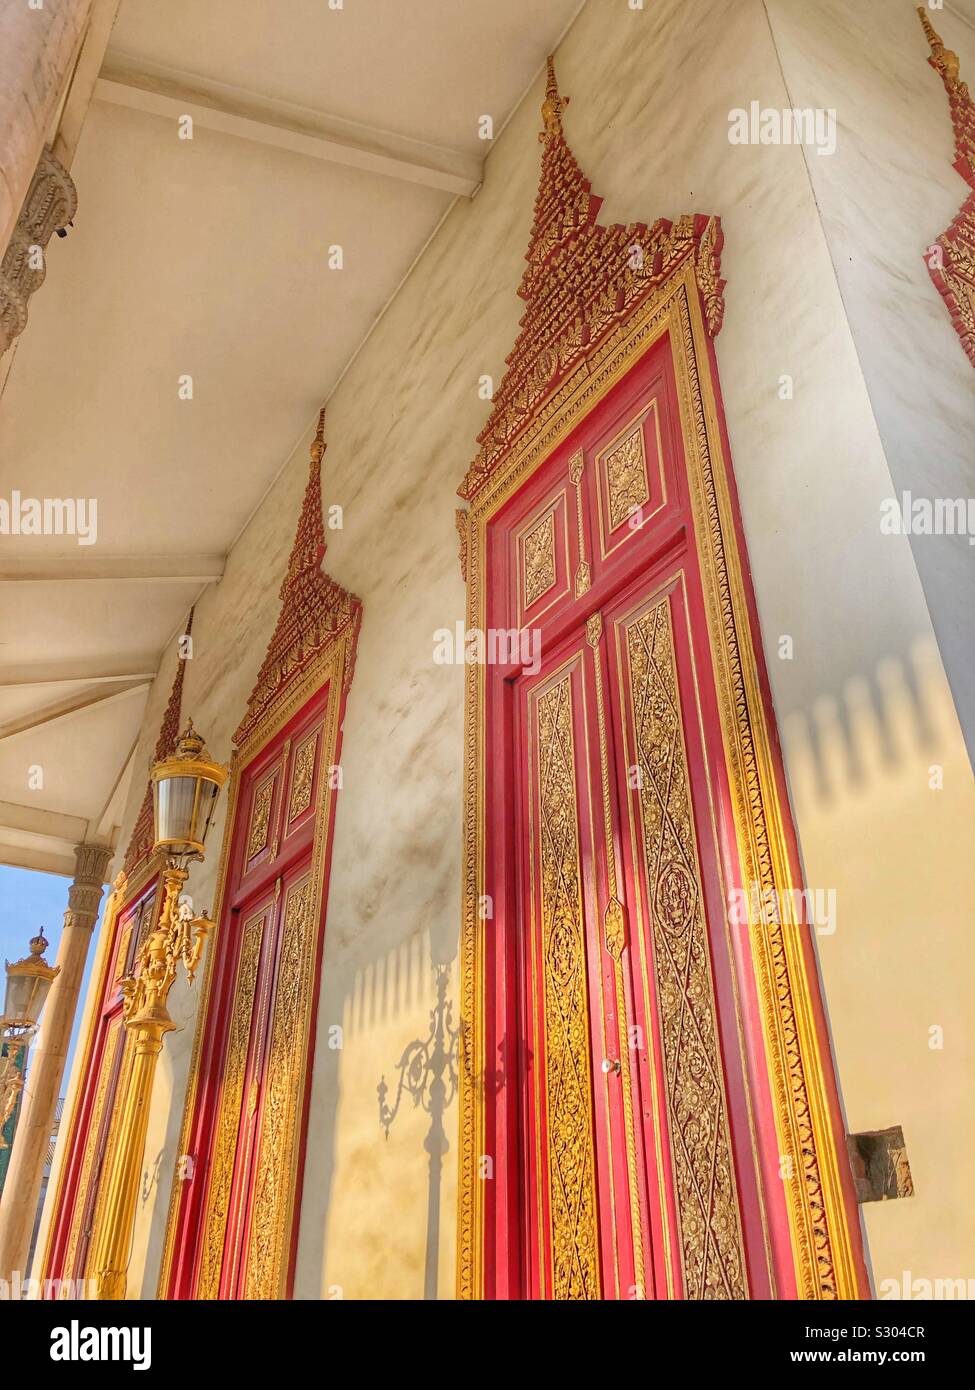 Ornate doors of a temple within the Royal Palace in Phnom Penh, Cambodia. Stock Photo